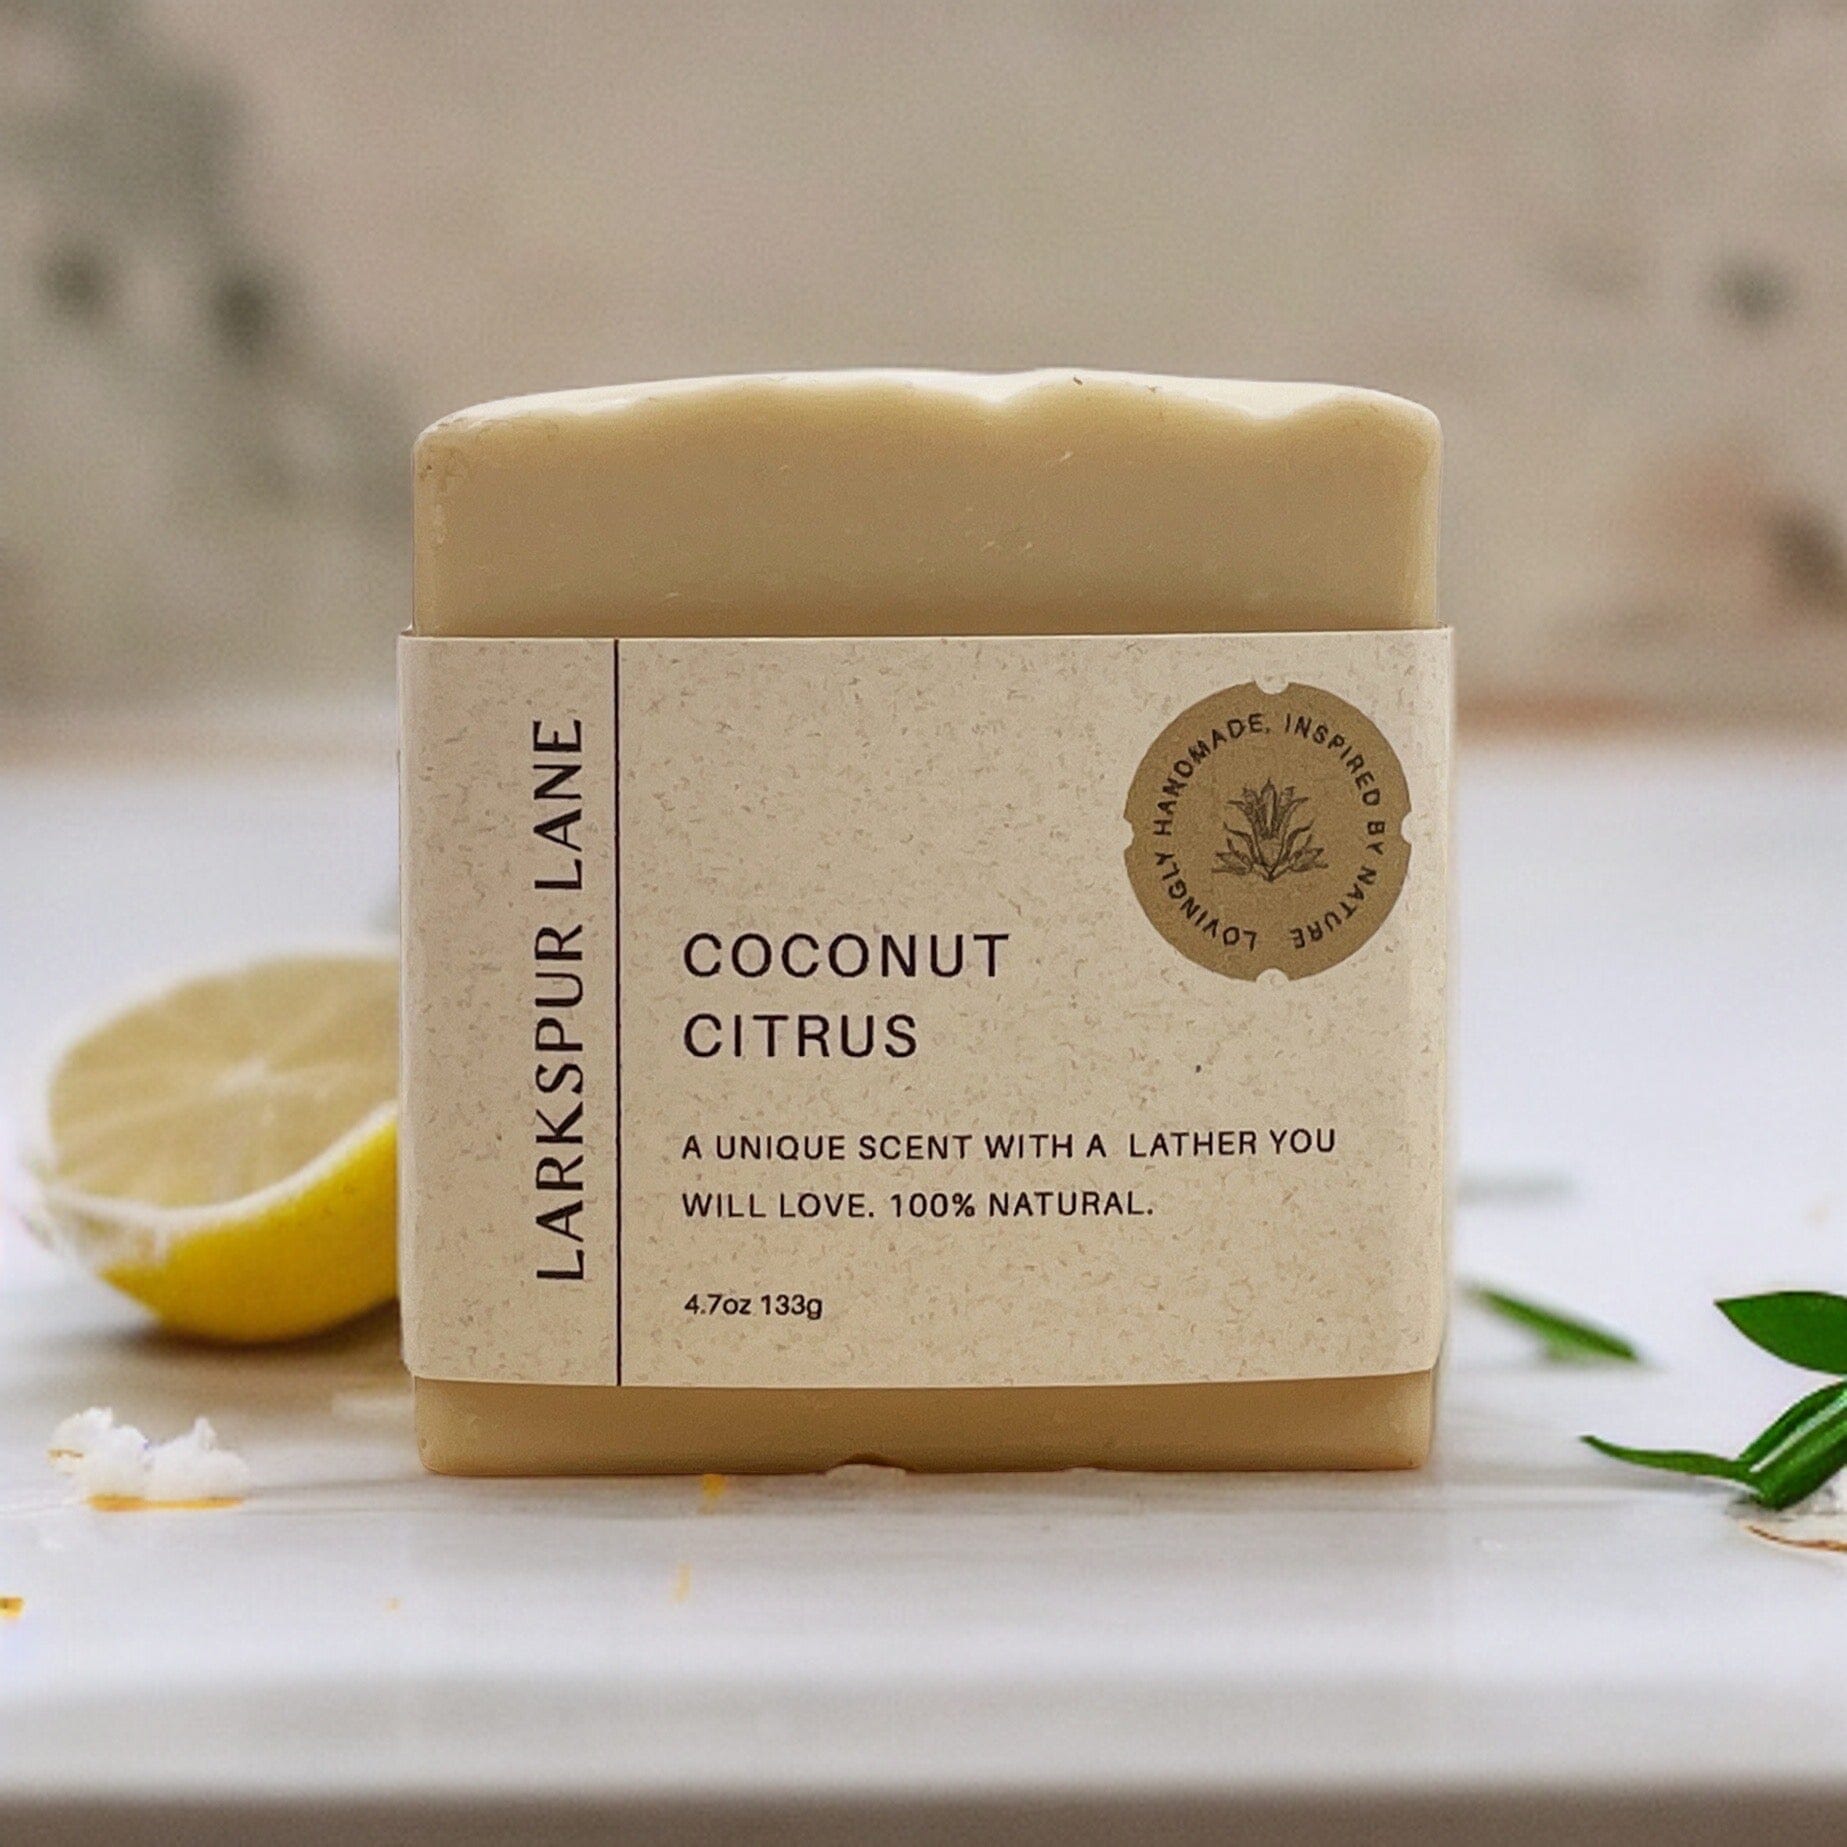 Larkspur Lane’s Coconut Citrus Soap sitting on a counter with citrus and coconut 